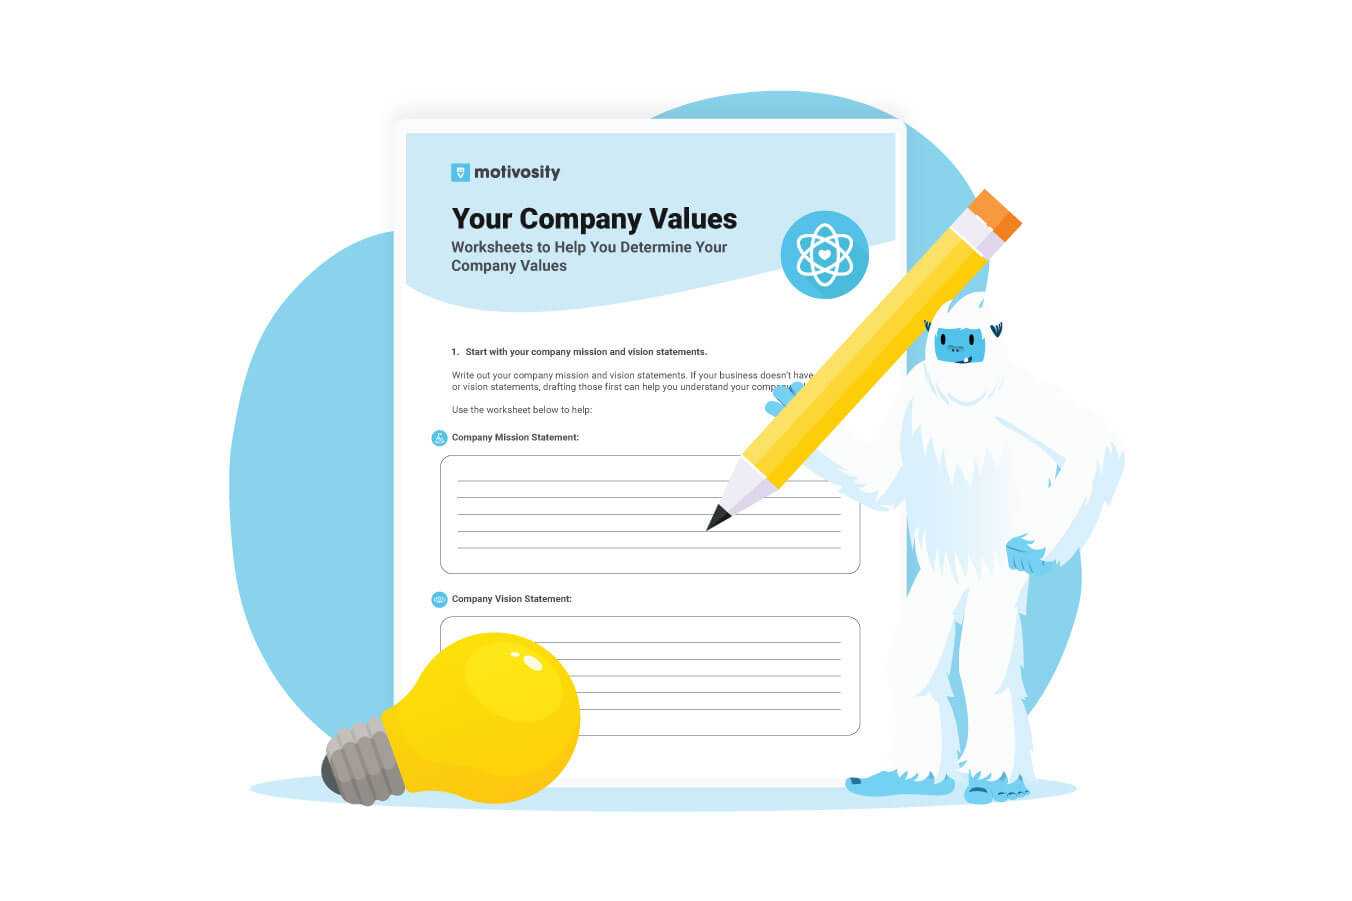 Illustration of Carl the Yeti standing next to the "Your Company Values" worksheet.